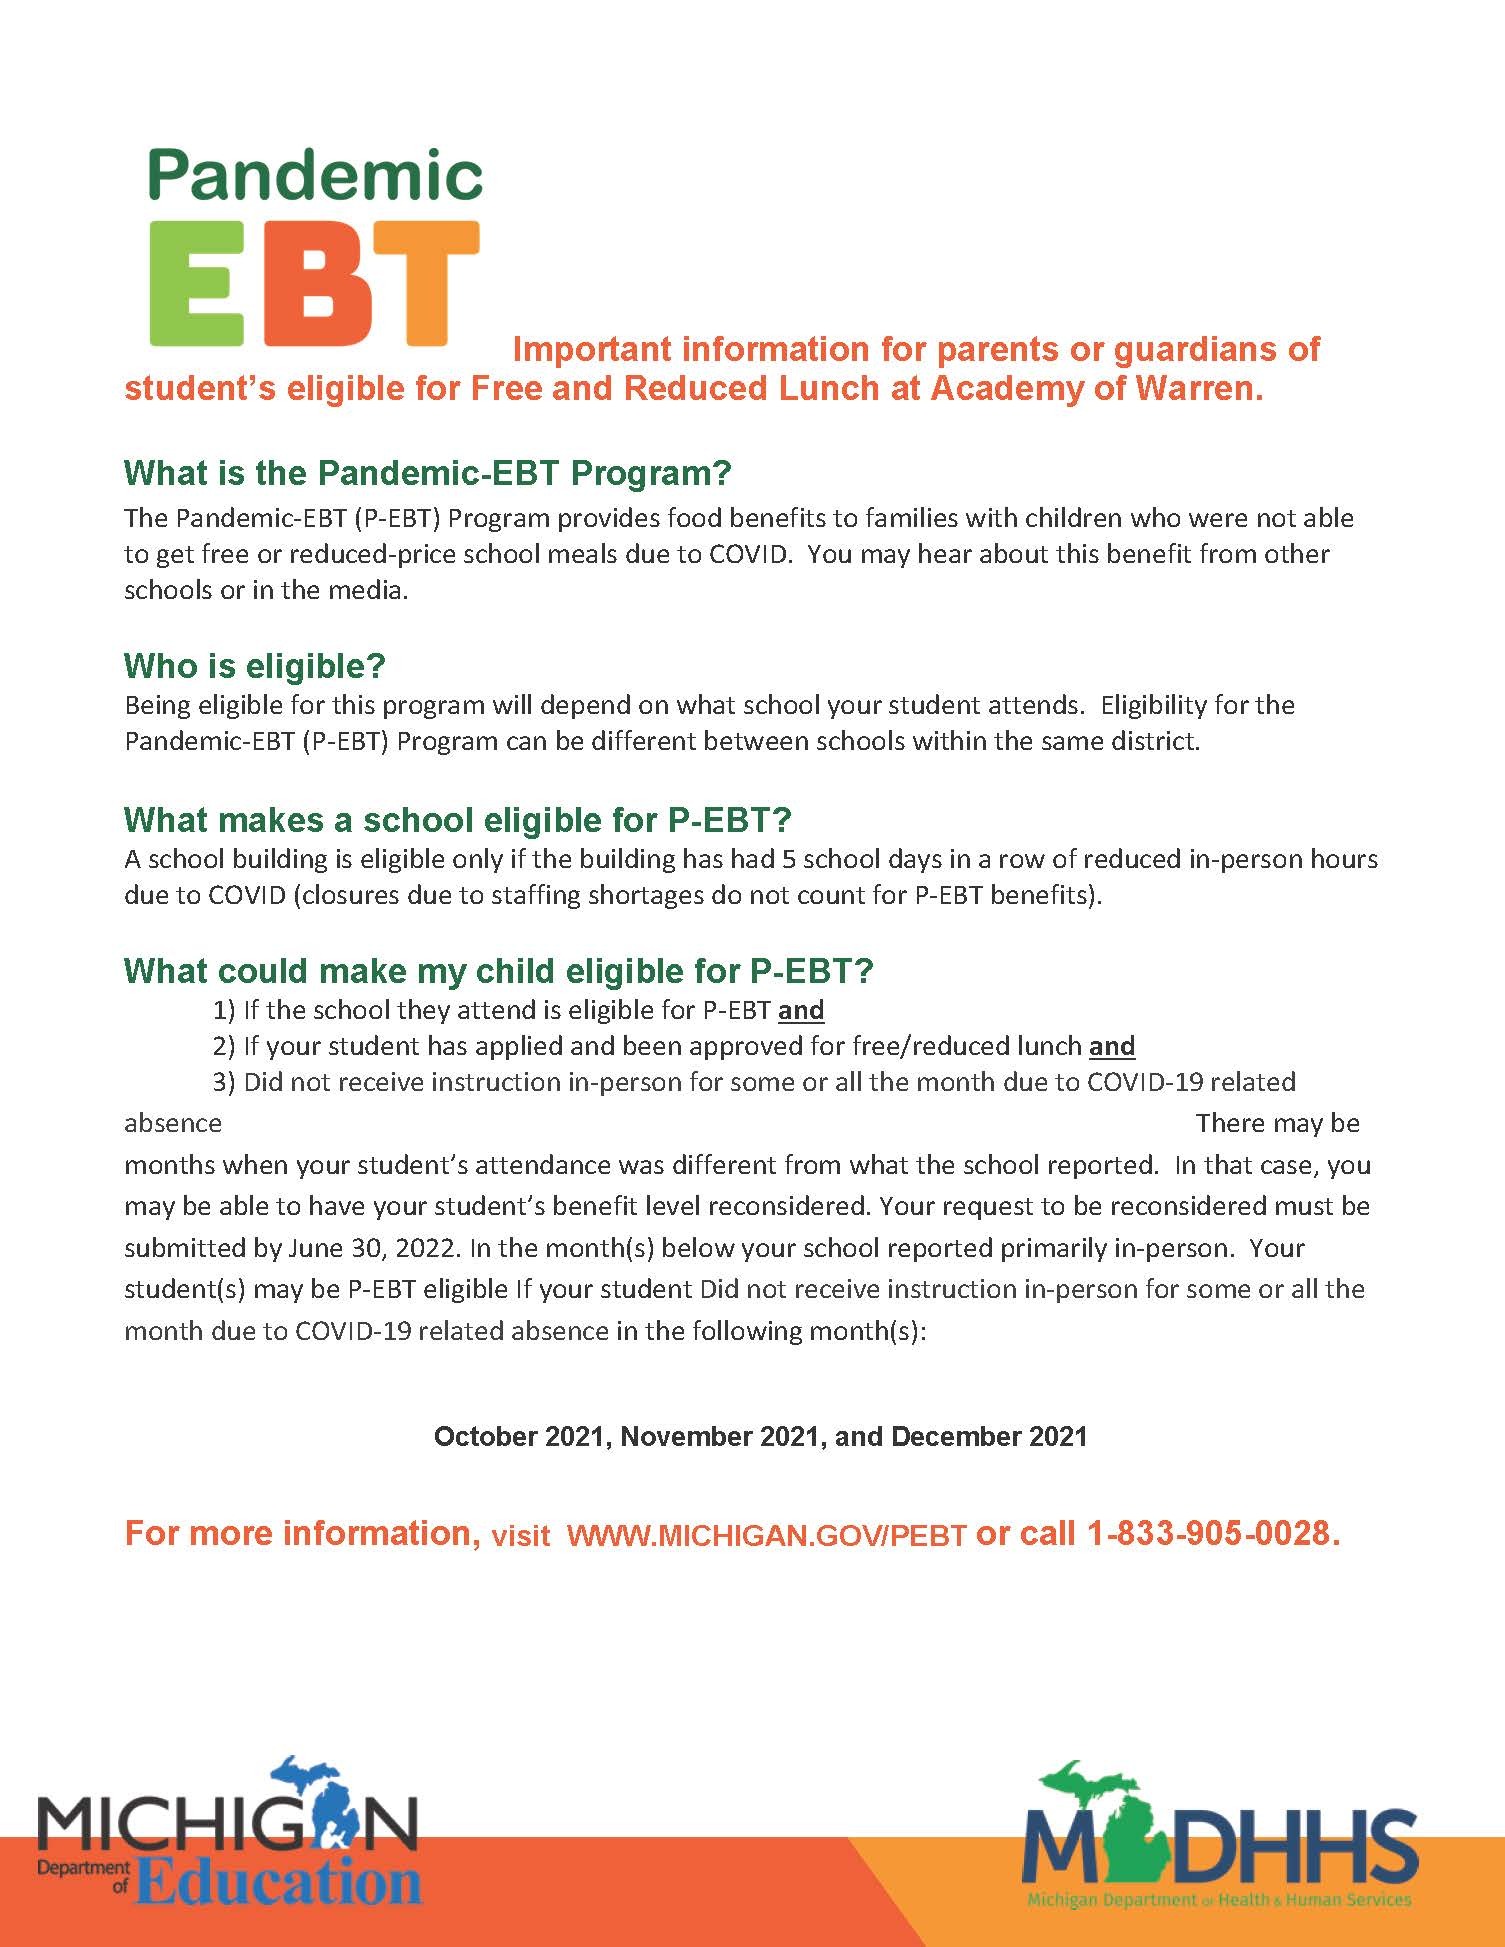 Important information for parents or guardians of student’s eligible for Free and Reduced Lunch at Academy of Warren. What is the Pandemic-EBT Program? The Pandemic-EBT (P-EBT) Program provides food benefits to families with children who were not able to get free or reduced-price school meals due to COVID. You may hear about this benefit from other schools or in the media. Who is eligible? Being eligible for this program will depend on what school your student attends. Eligibility for the Pandemic-EBT (P-EBT) Program can be different between schools within the same district. What makes a school eligible for P-EBT? A school building is eligible only if the building has had 5 school days in a row of reduced in-person hours due to COVID (closures due to staffing shortages do not count for P-EBT benefits). What could make my child eligible for P-EBT? 1) If the school they attend is eligible for P-EBT and 2) If your student has applied and been approved for free/reduced lunch and 3) Did not receive instruction in-person for some or all the month due to COVID-19 related absence There may be months when your student’s attendance was different from what the school reported. In that case, you may be able to have your student’s benefit level reconsidered. Your request to be reconsidered must be submitted by June 30, 2022. In the month(s) below your school reported primarily in-person. Your student(s) may be P-EBT eligible If your student Did not receive instruction in-person for some or all the month due to COVID-19 related absence in the following month(s):  For more information, visit WWW.MICHIGAN.GOV/PEBT or call 1-833-905-0028.